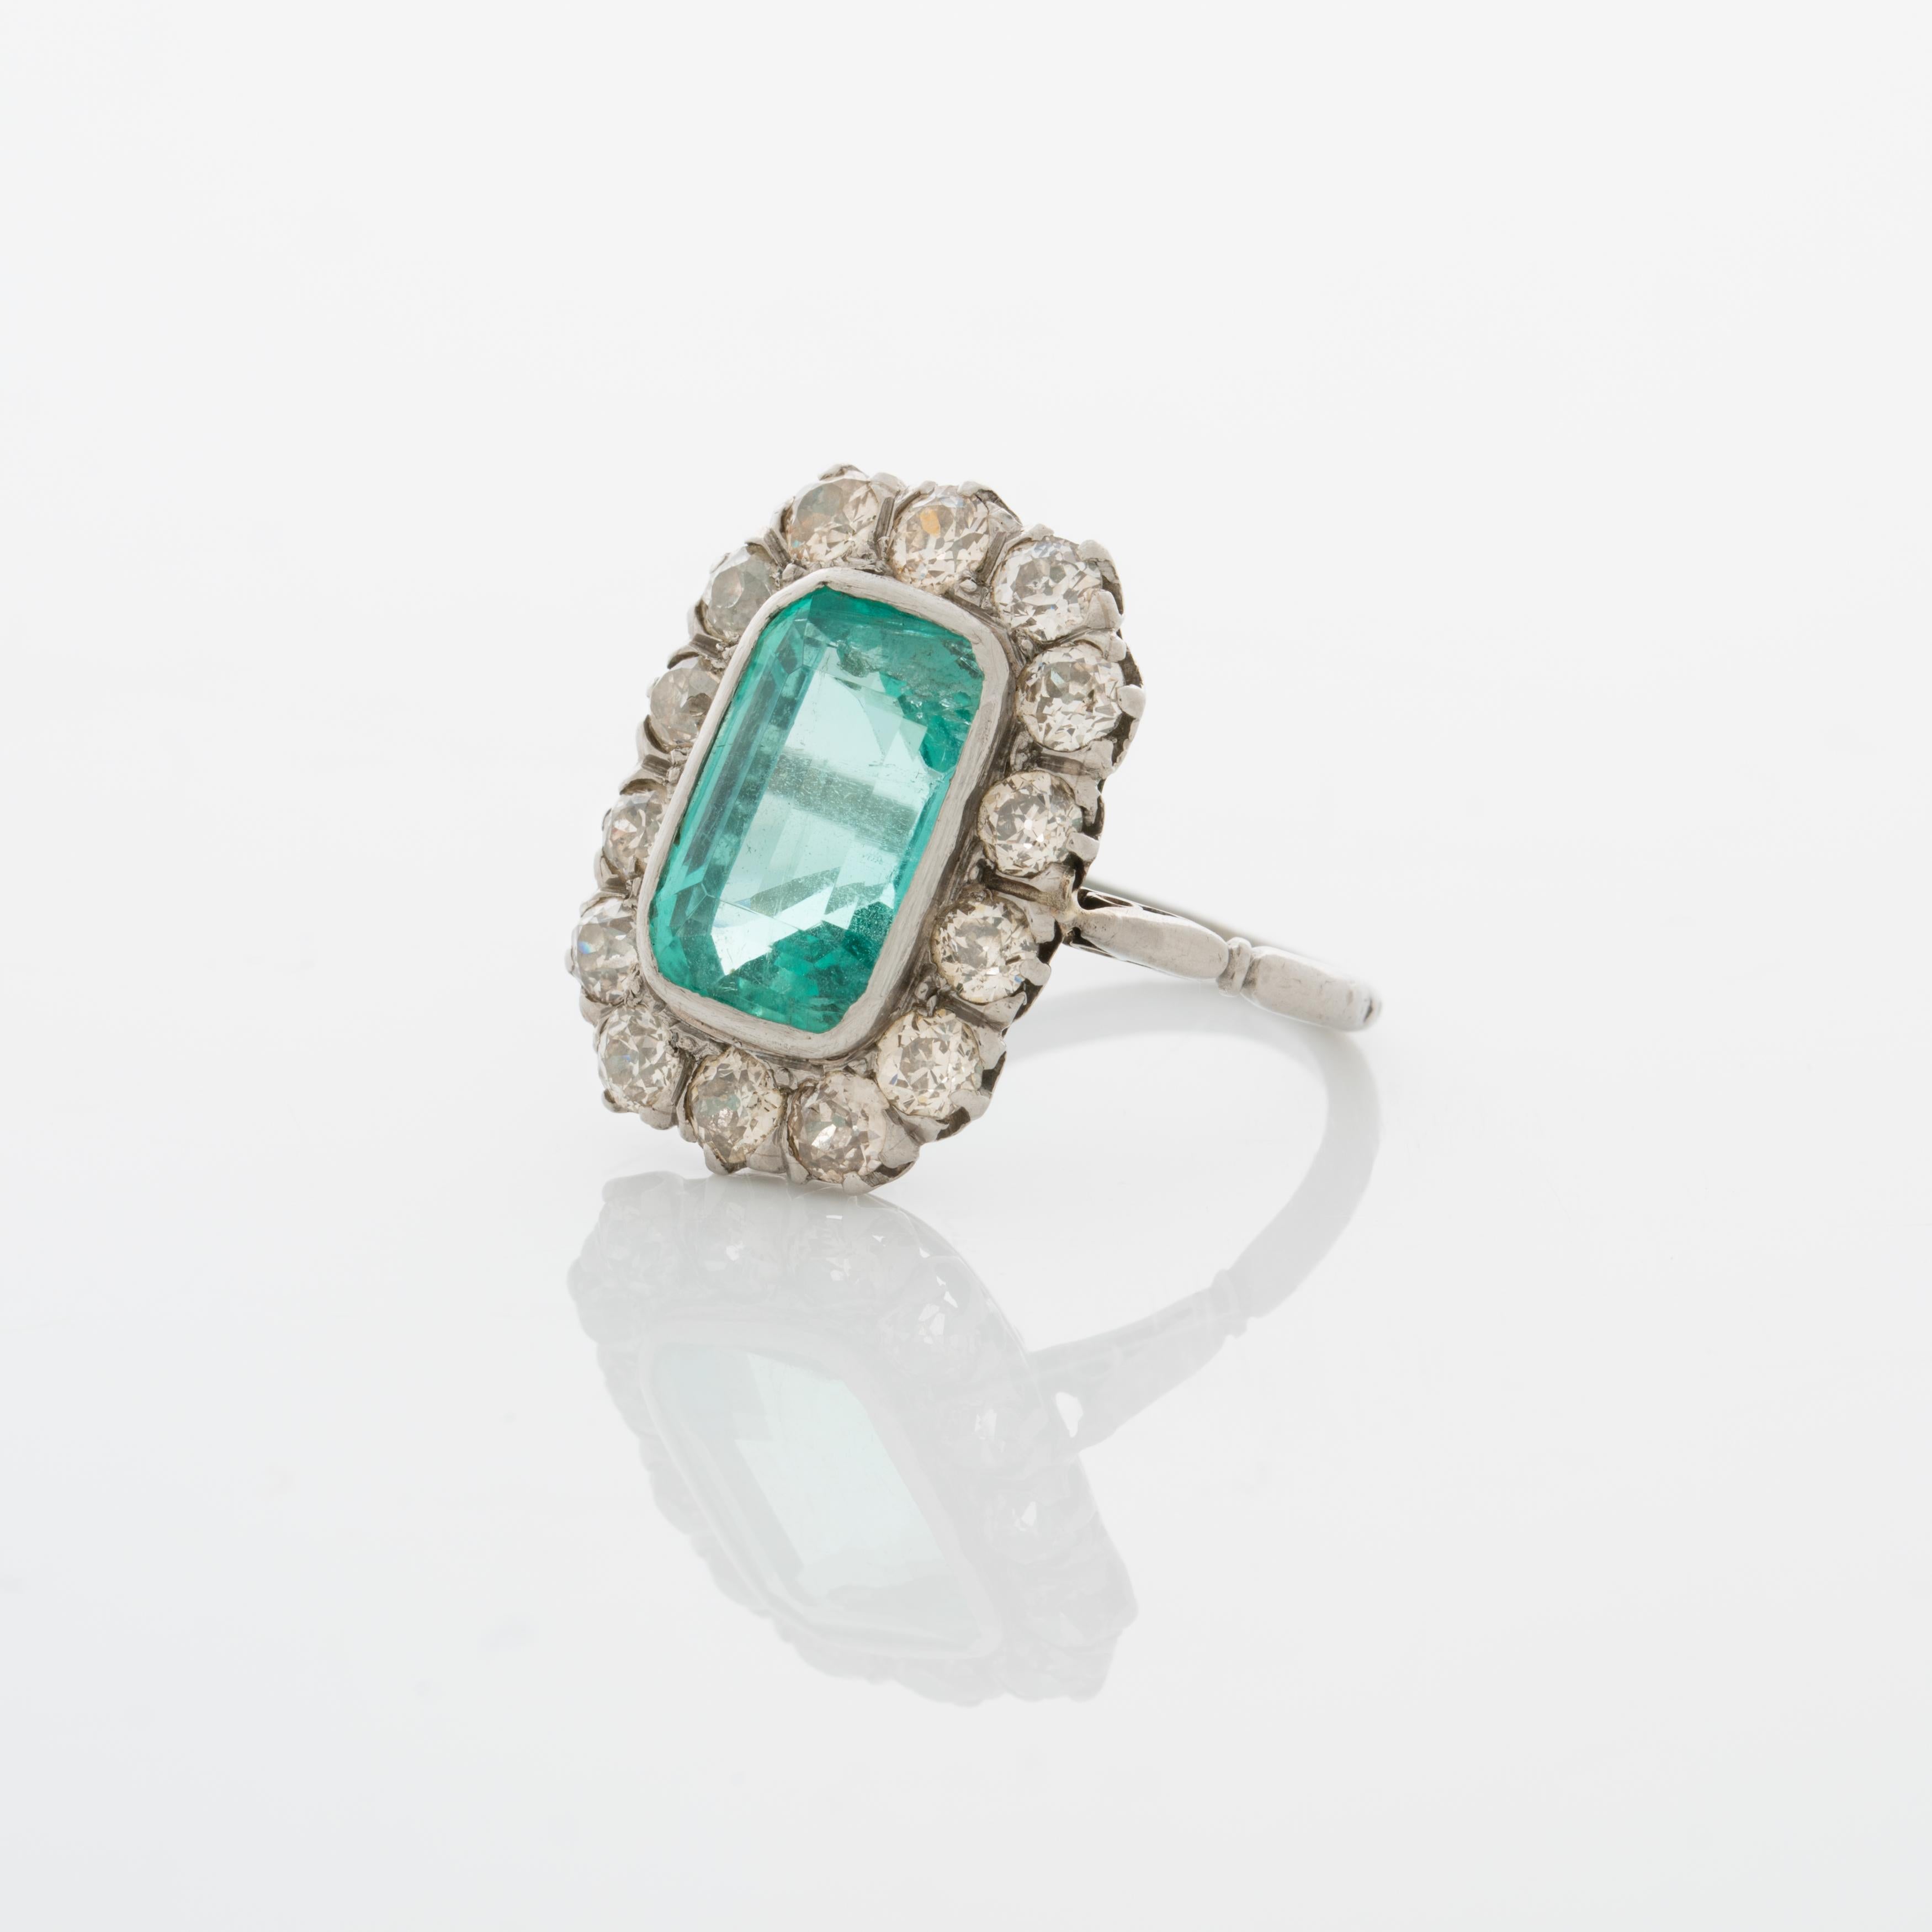 Edwardian Platinum and 4.5 Carat Colombian Emerald Ring and Diamond Ring In Excellent Condition For Sale In New York, NY